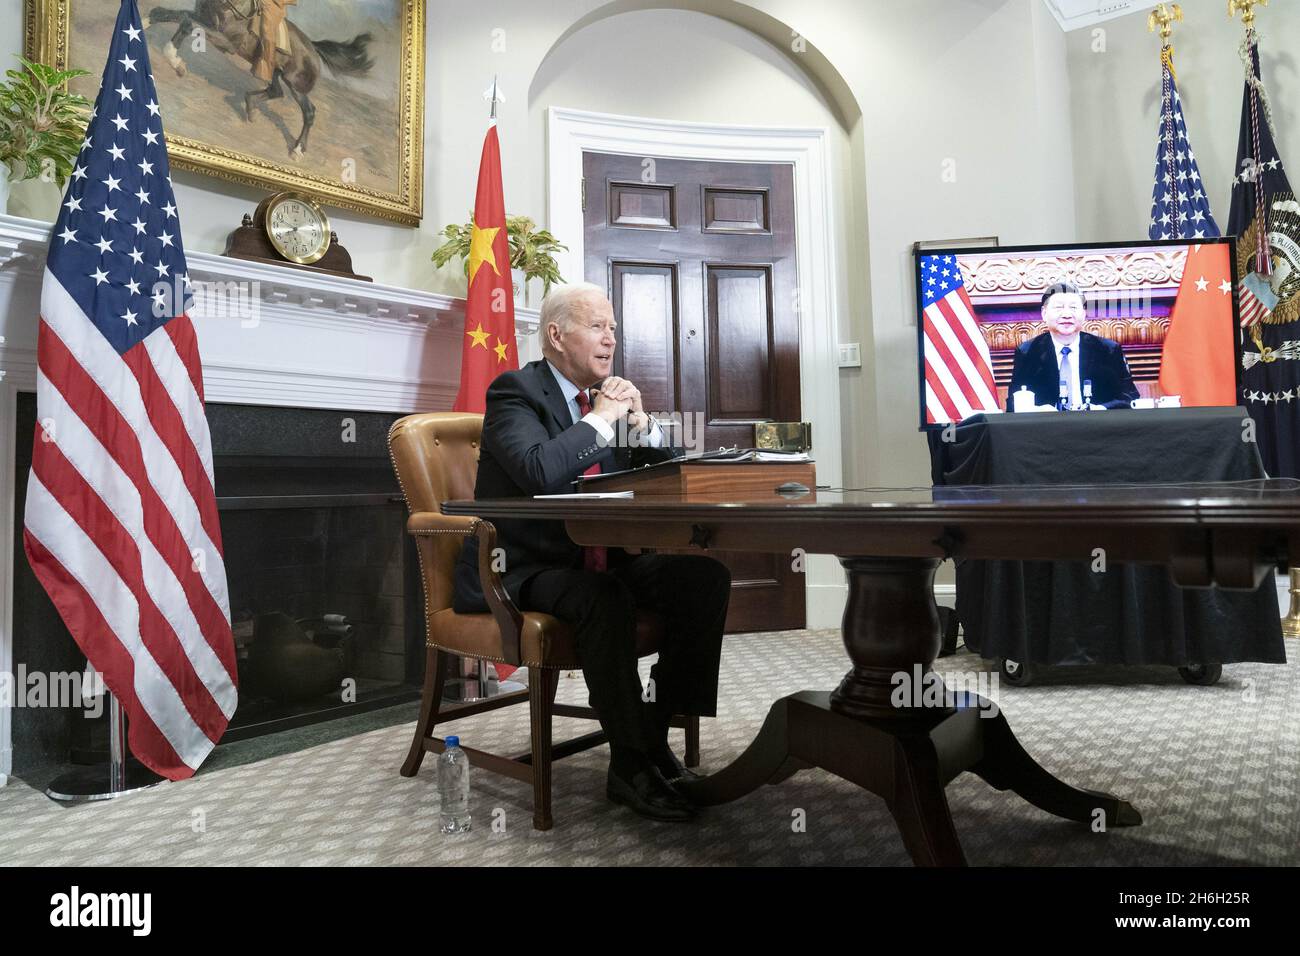 Washington, United States. 15th Nov, 2021. President Joe Biden speaks during a virtual summit with Chinese President Xi Jinping in the Roosevelt Room of the White House in Washington DC on Monday, November 15, 2021. Photo by Sarah Silbiger/UPI Credit: UPI/Alamy Live News Stock Photo